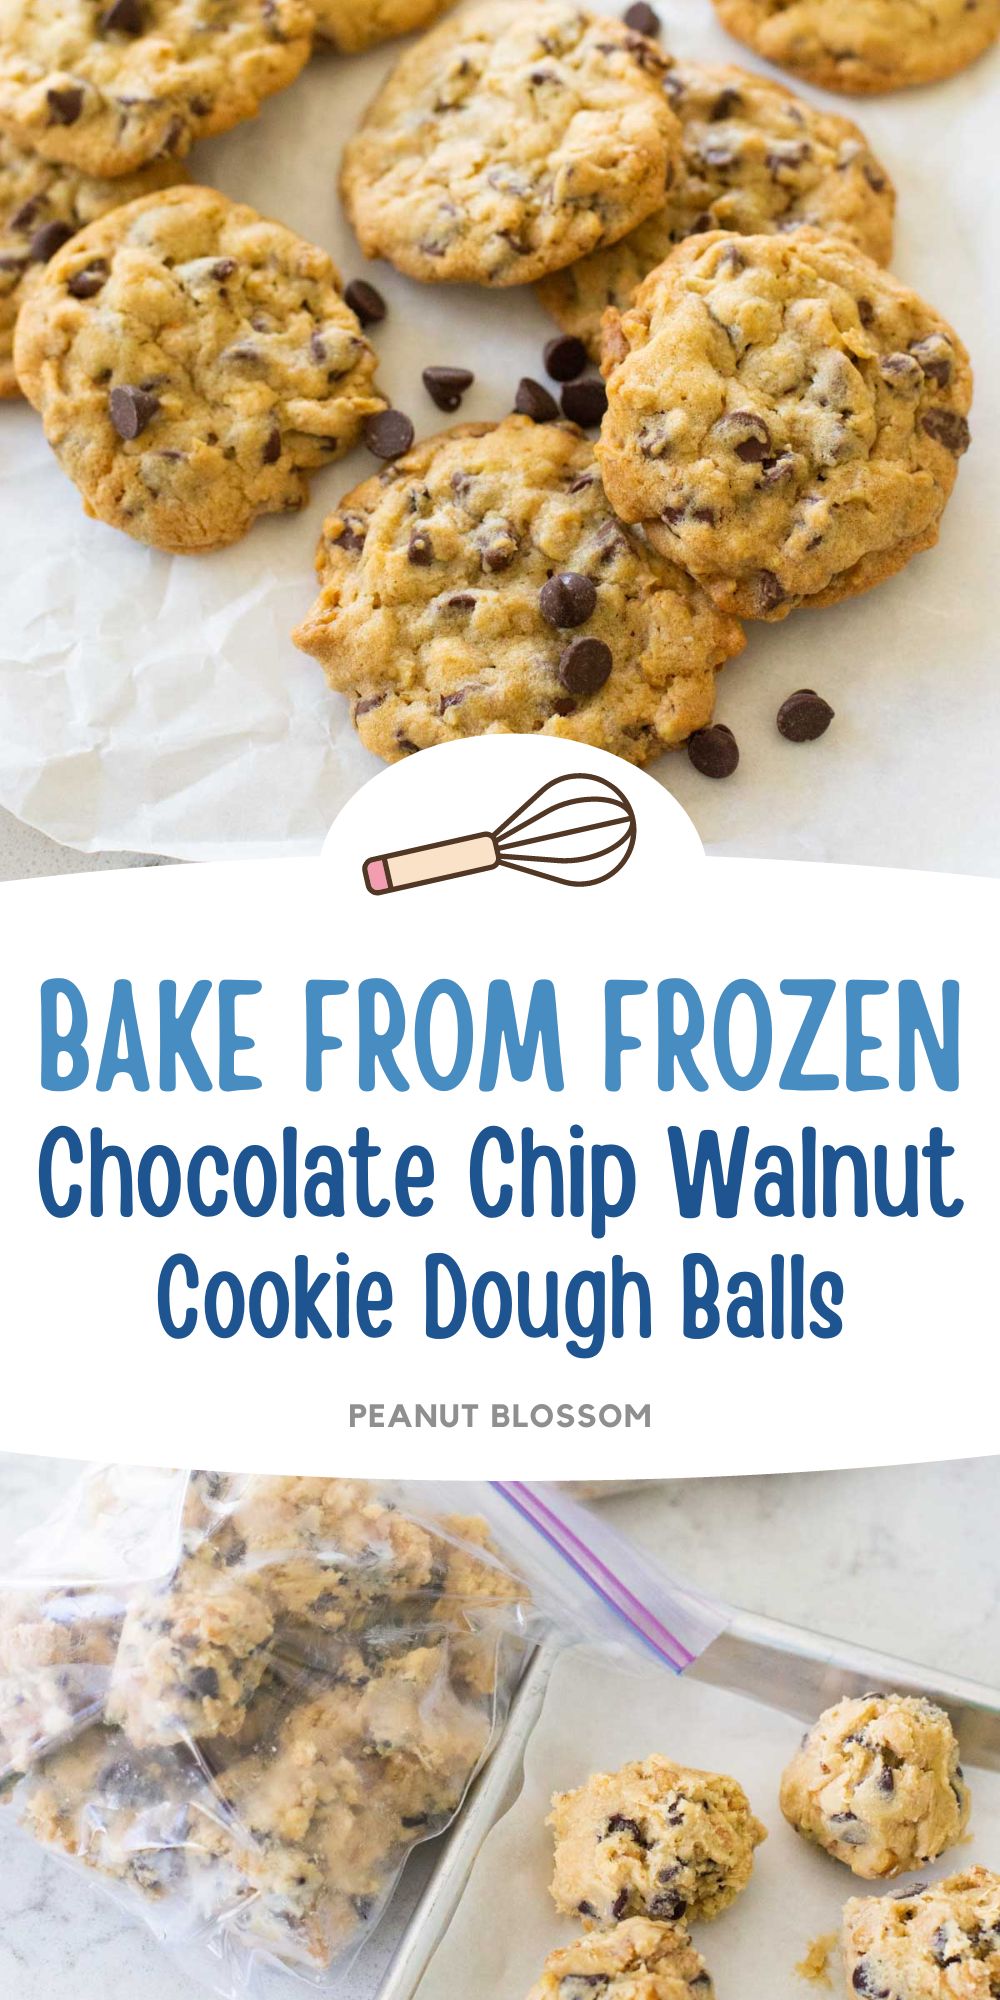 The frozen cookie dough balls are shown next to the baked chocolate chip walnut cookies.